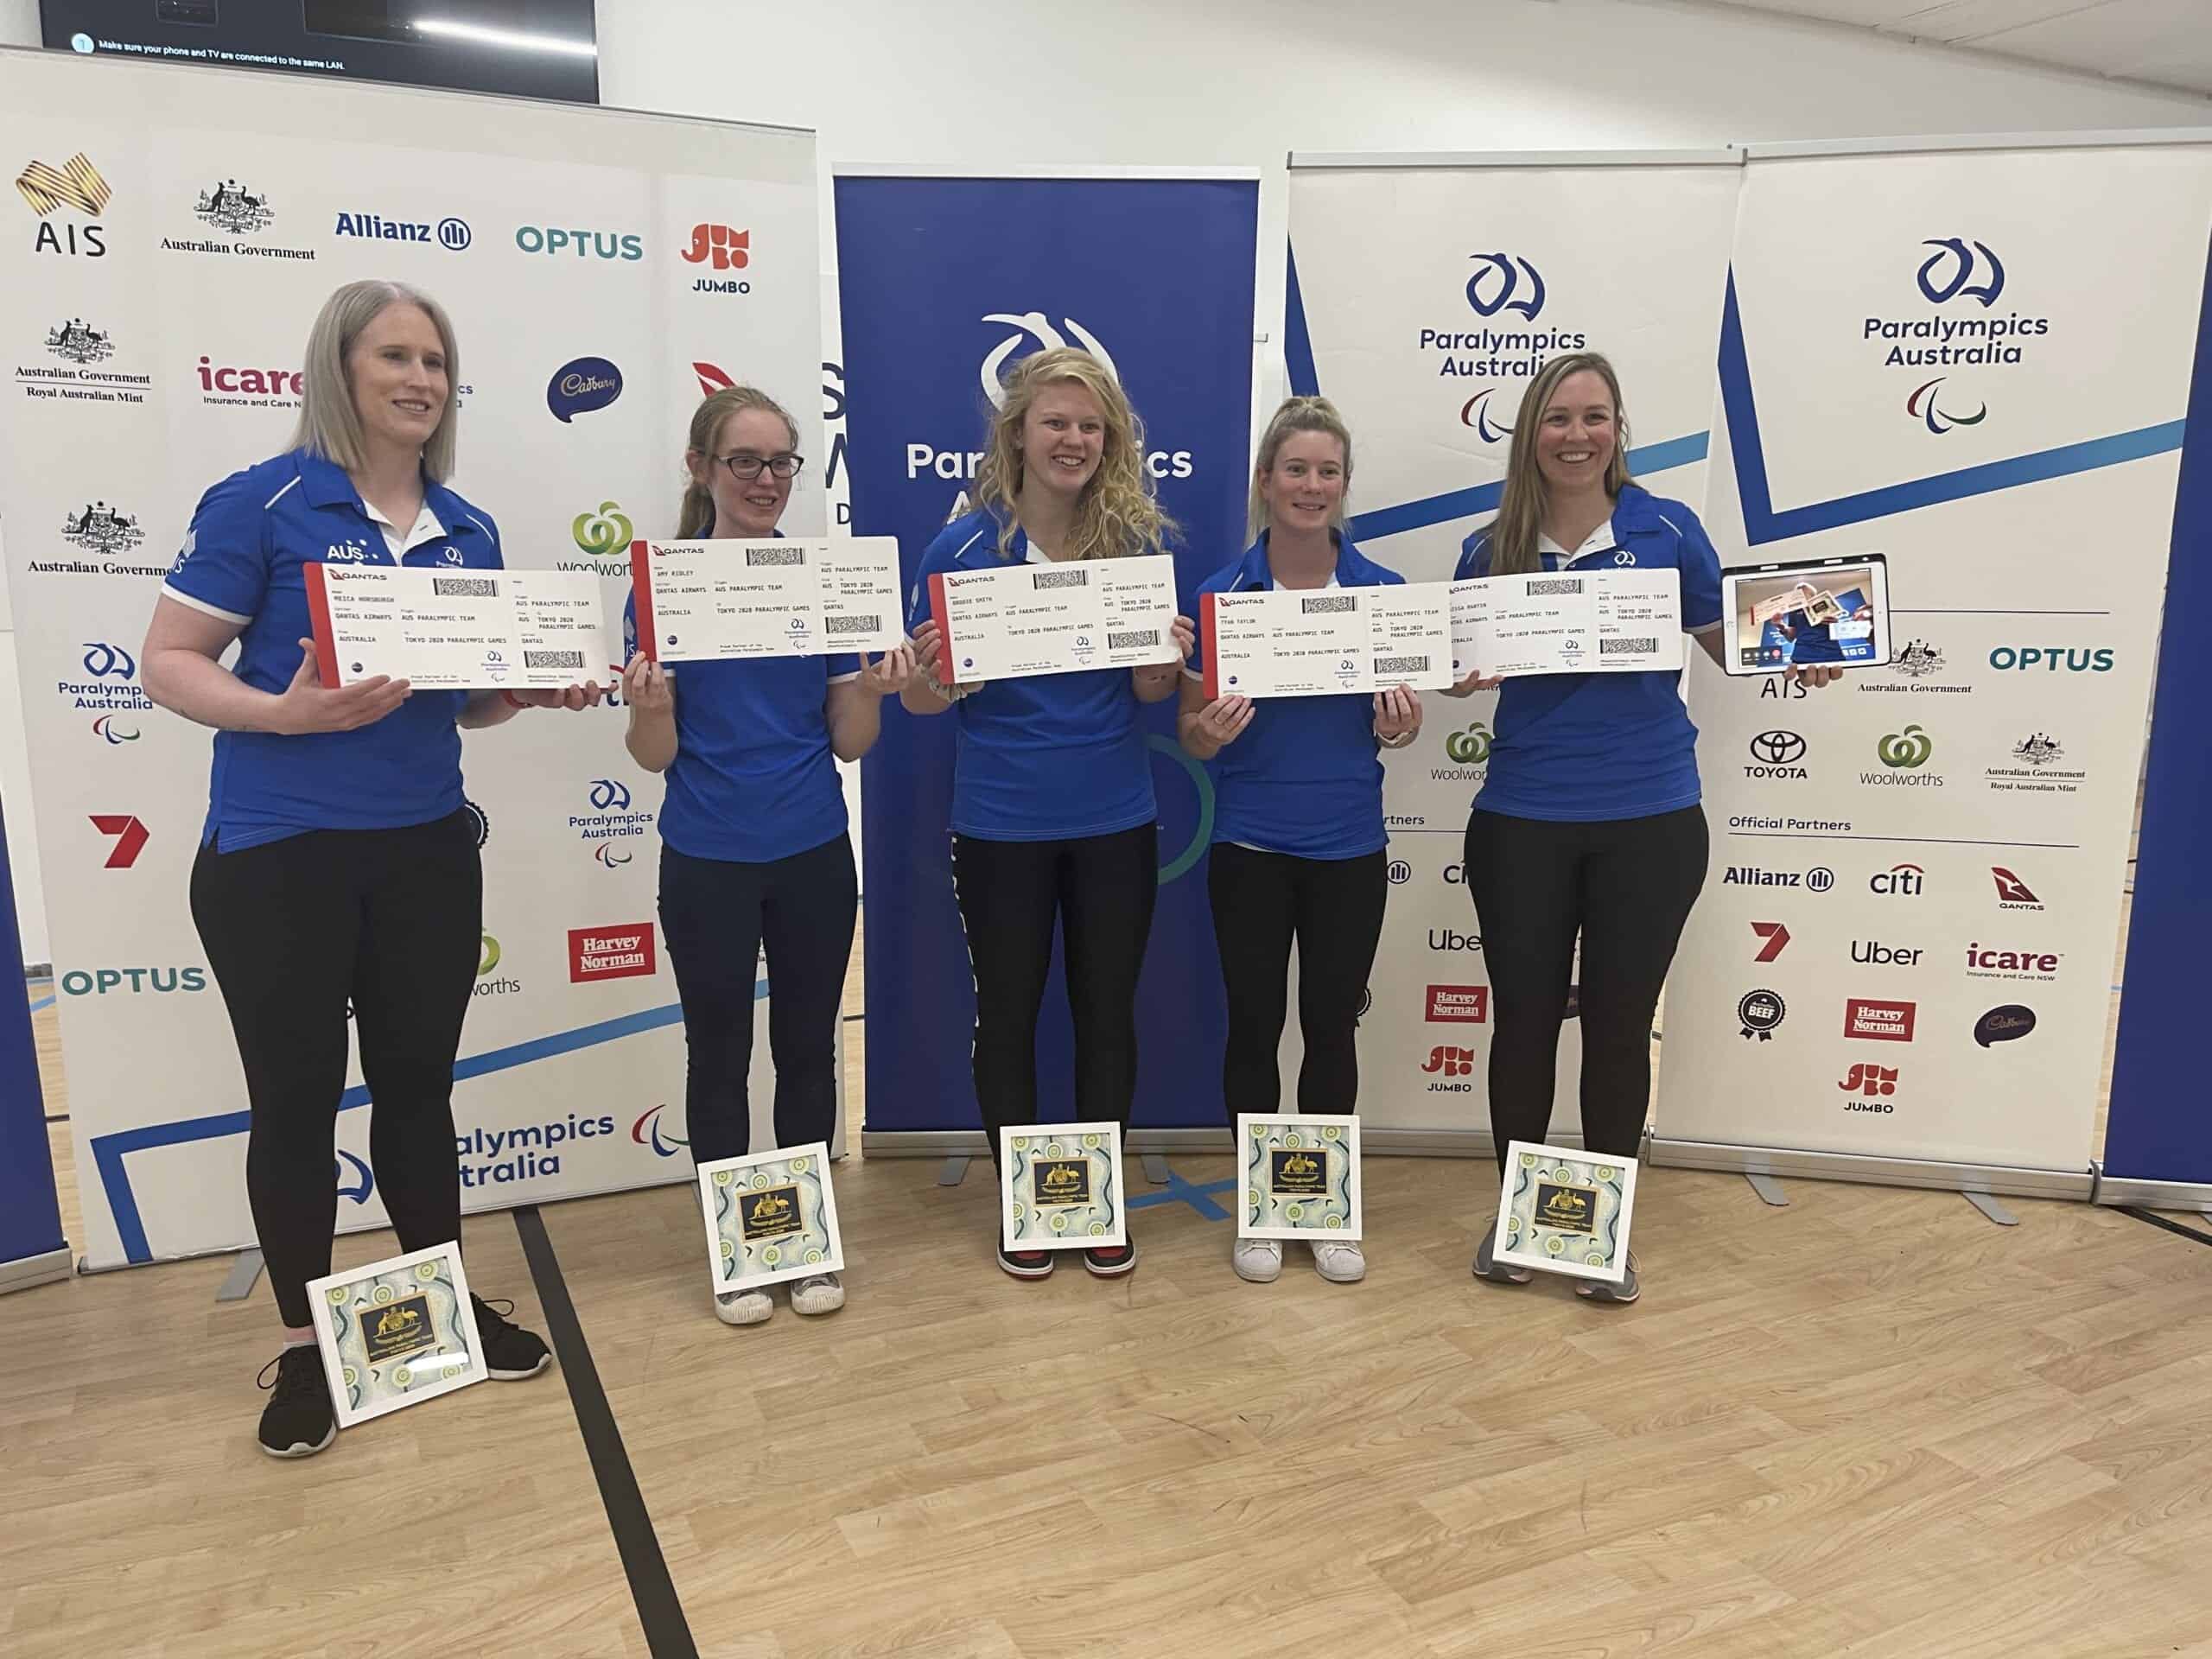 The picture shows 5 of the Australian Paralympic Goalball team members,Meica Horsburgh Jenny Blow Tyan Taylor Raissa Martin Brodie Smith Amy Ridley